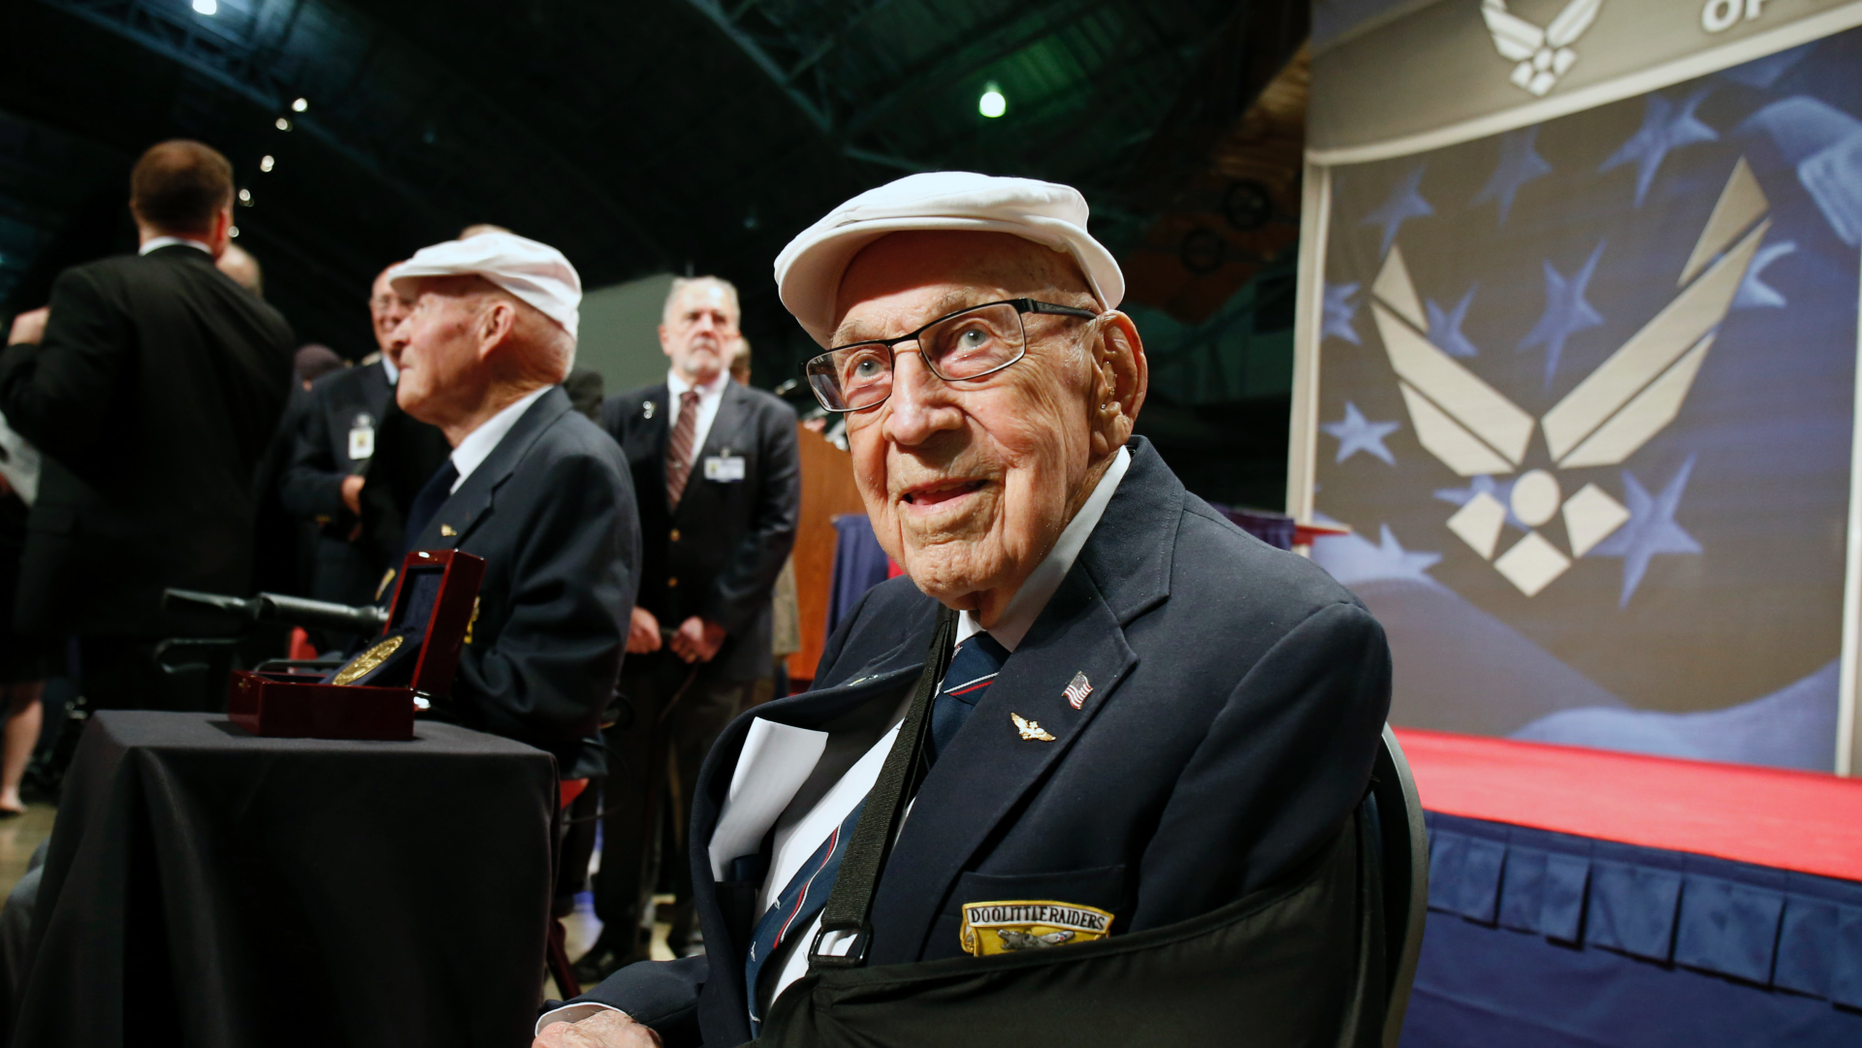 Two members of the Doolittle Tokyo Raiders, Lt. Col. Richard Air Force retired from the United States 